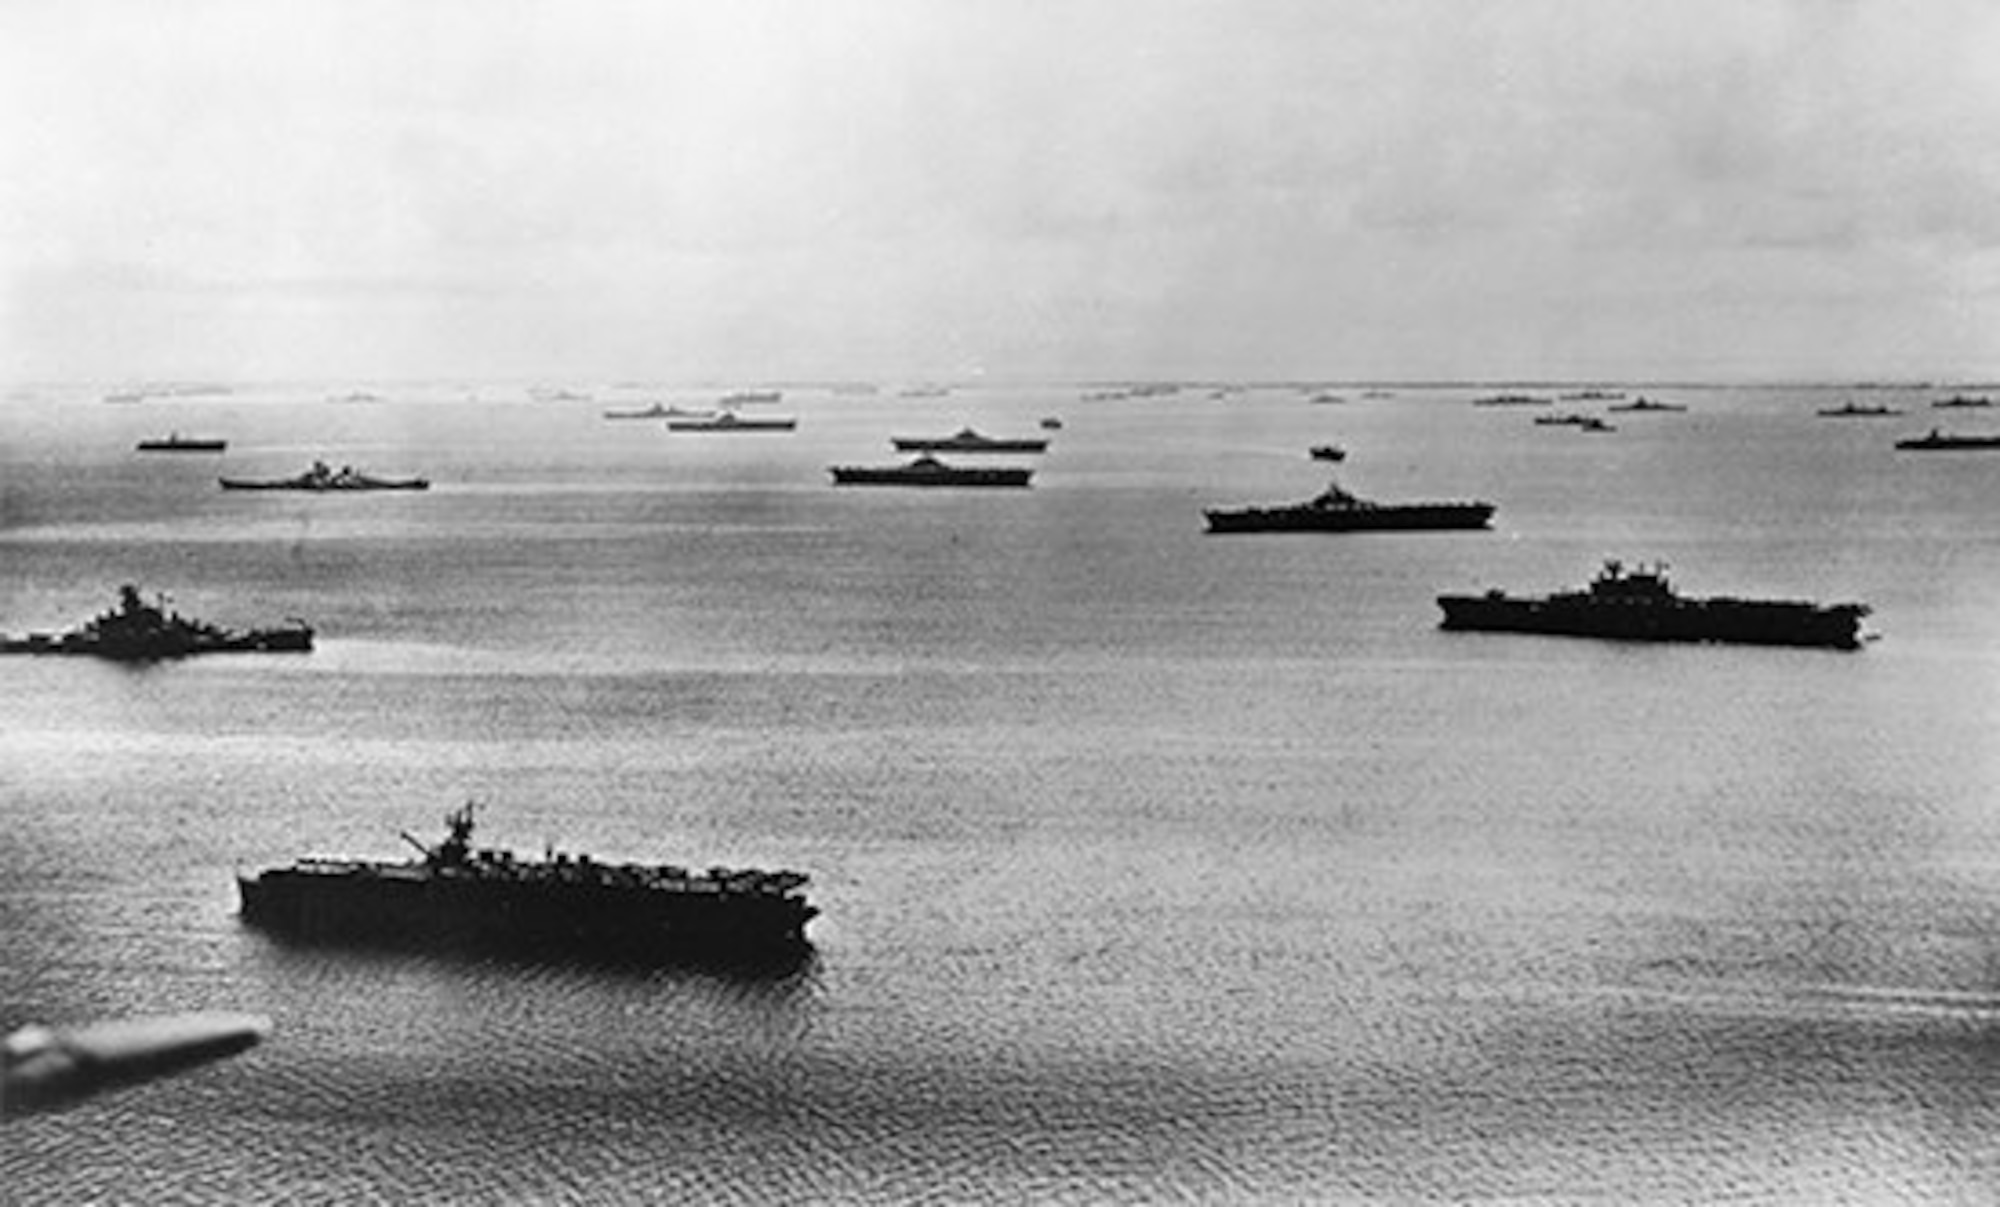 U.S. Navy Task Force 58 at anchor at Majuro, Marshall Islands, on April 25, 1944, prior to the battle of the Philippine Sea. It consisted of fifteen carriers, seven fast battleships 13 cruisers, 58 destroyers and about 900 aircraft at the time.